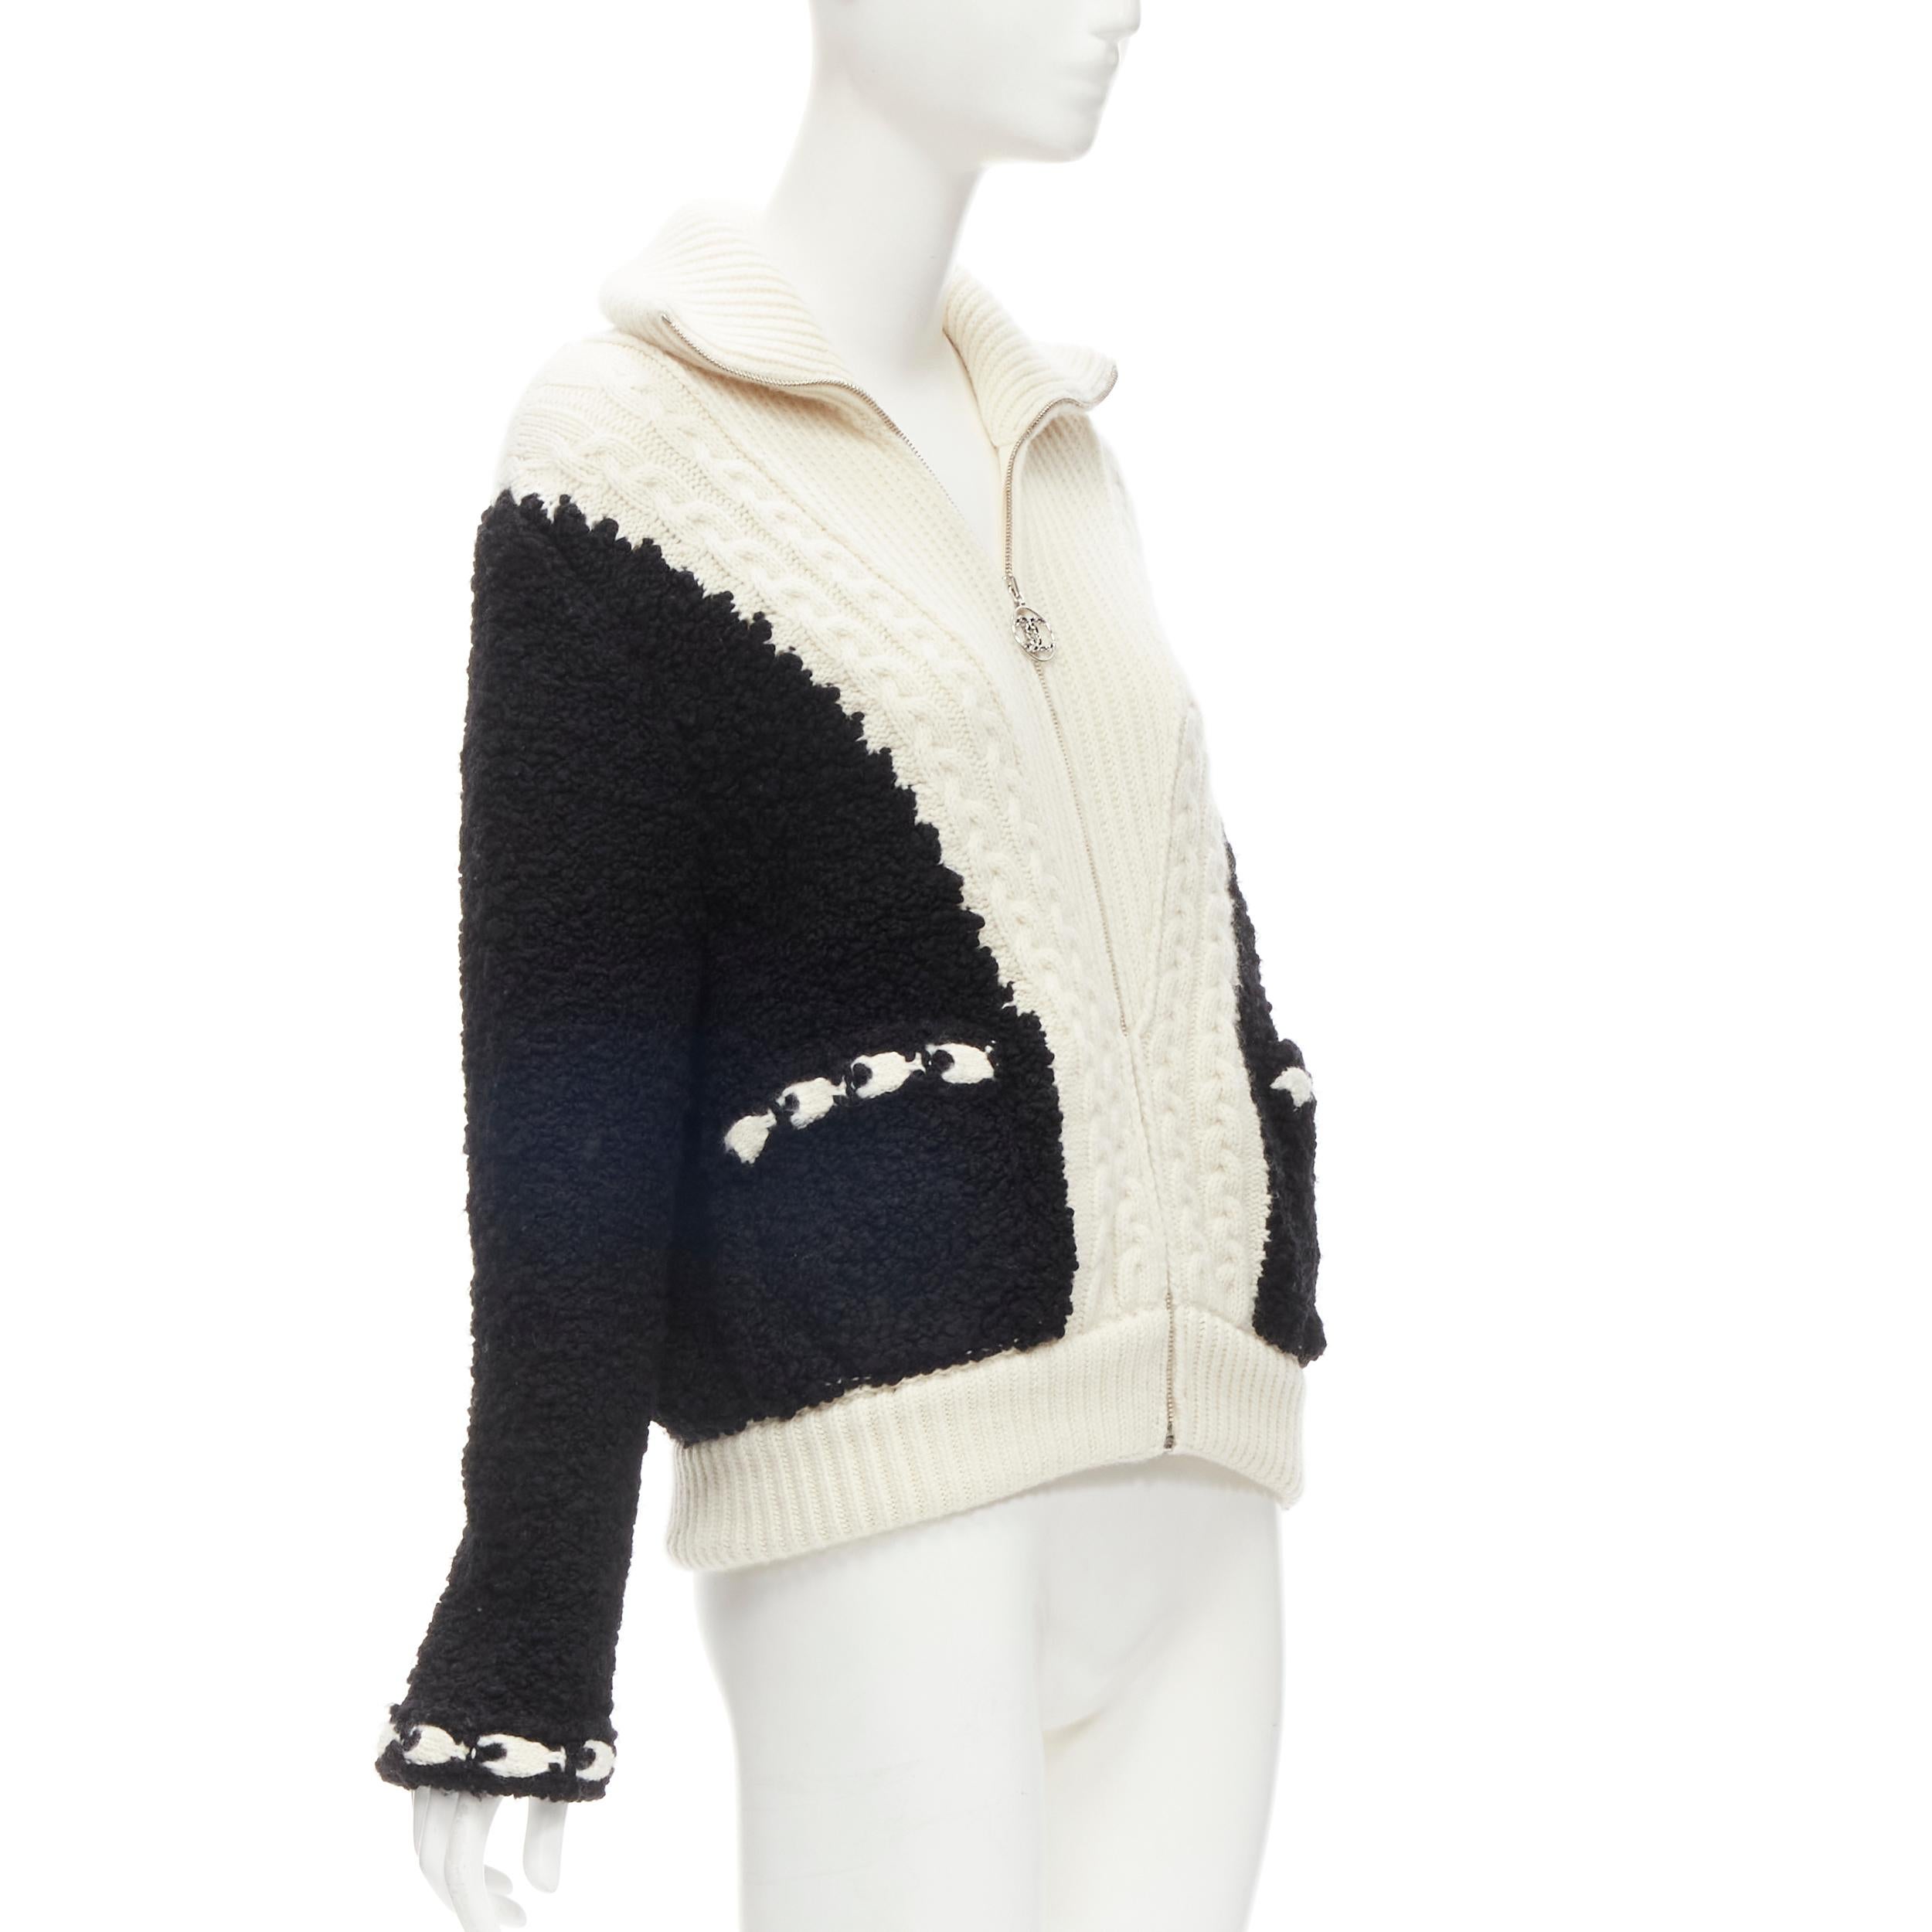 Women's CHANEL black boucle cream cable knit faux layered cardigan jacket FR34 XS